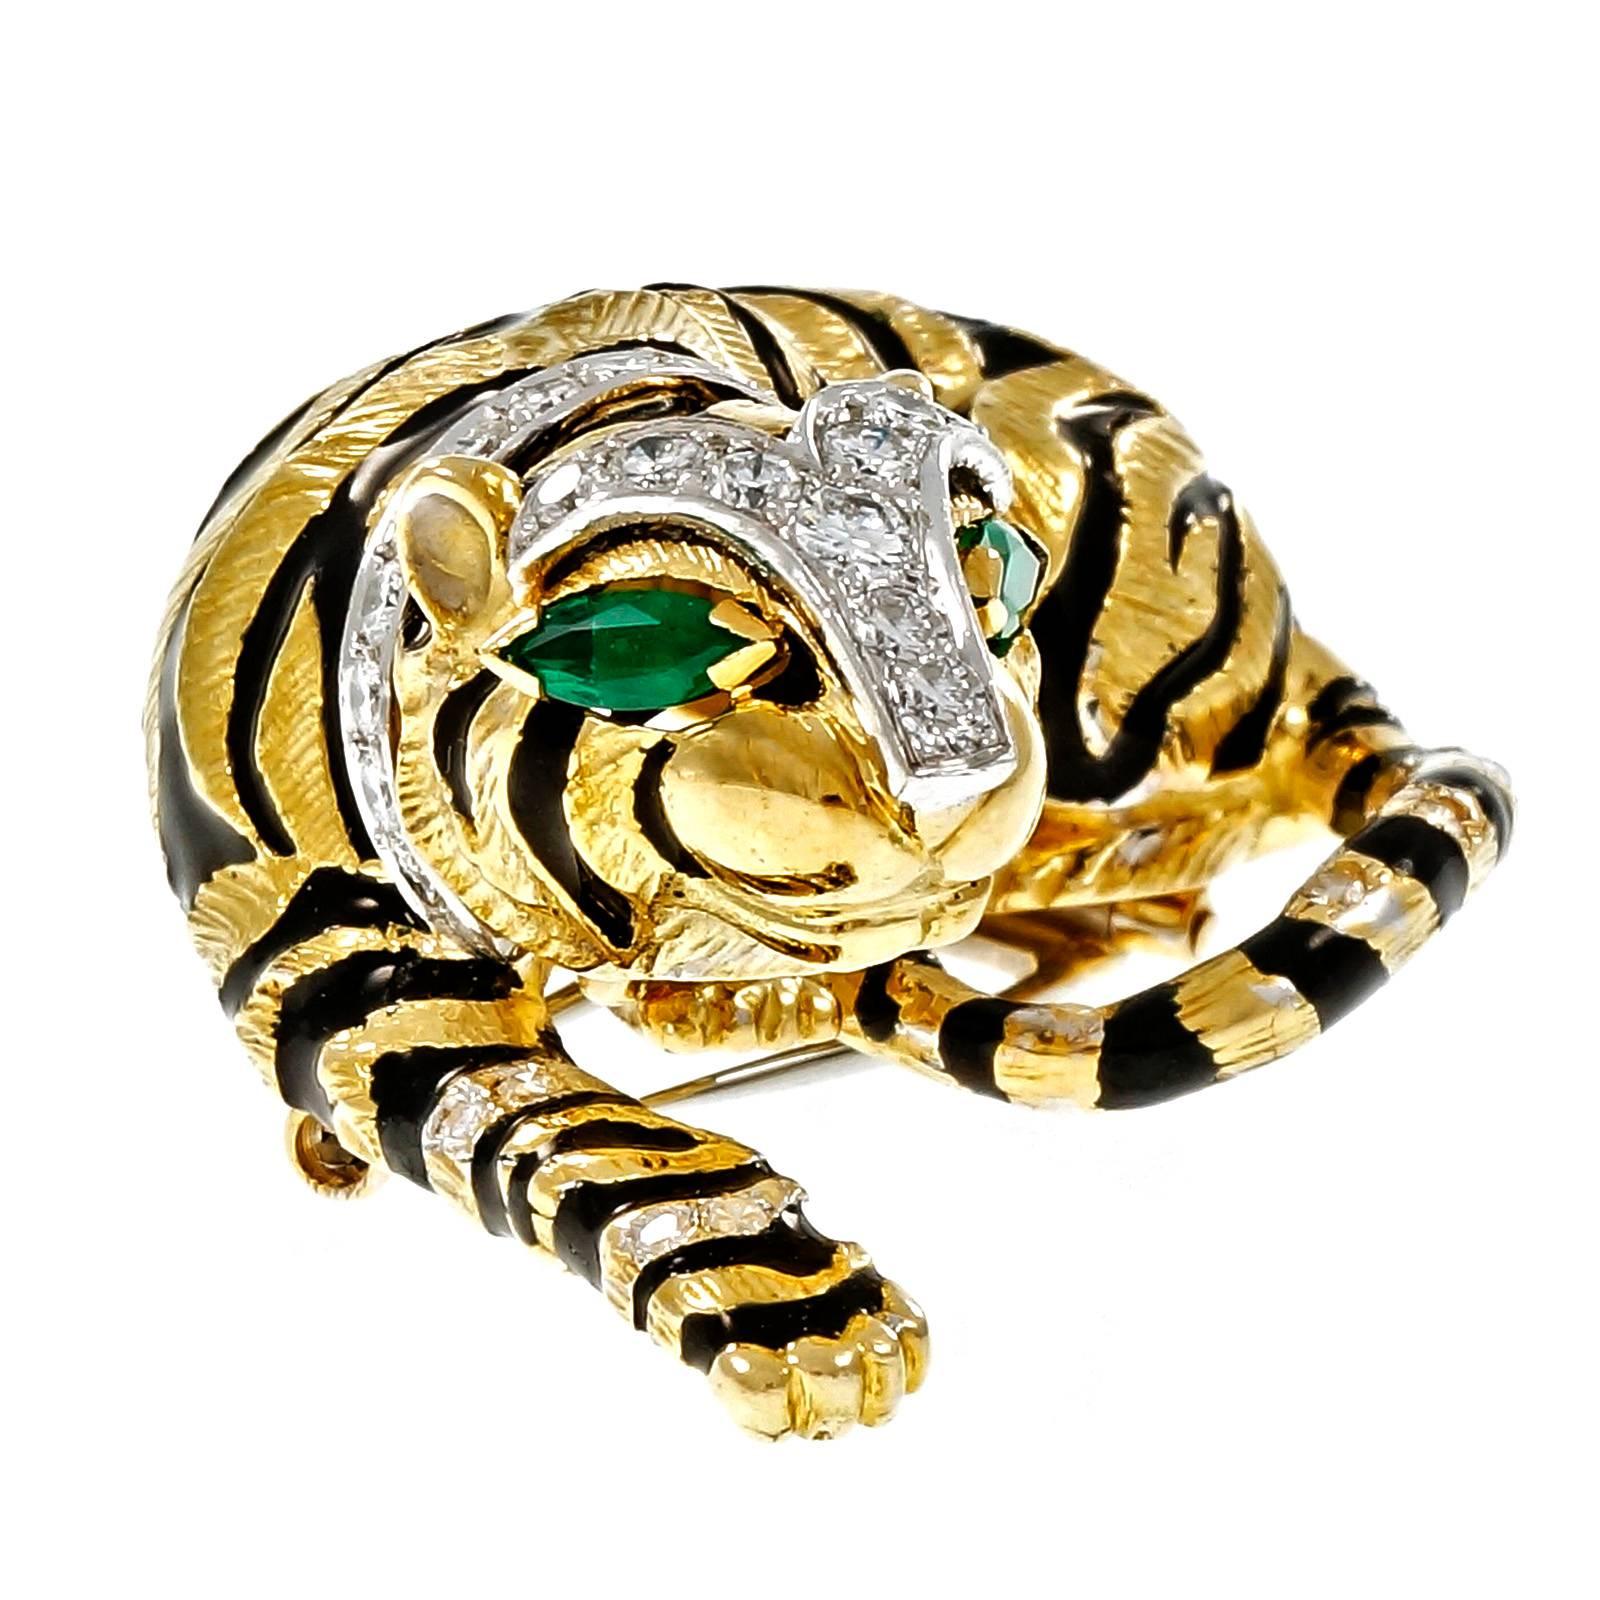 1960 David Webb Tiger pin authenticated by David Webb. Black enamel stripes. Diamond and Emerald accents.

25 round diamonds, approx. total weight 1.25cts, F – G, VS
10 single cut diamonds, approx. total weight .10cts, F – G, VS
2 Marquise